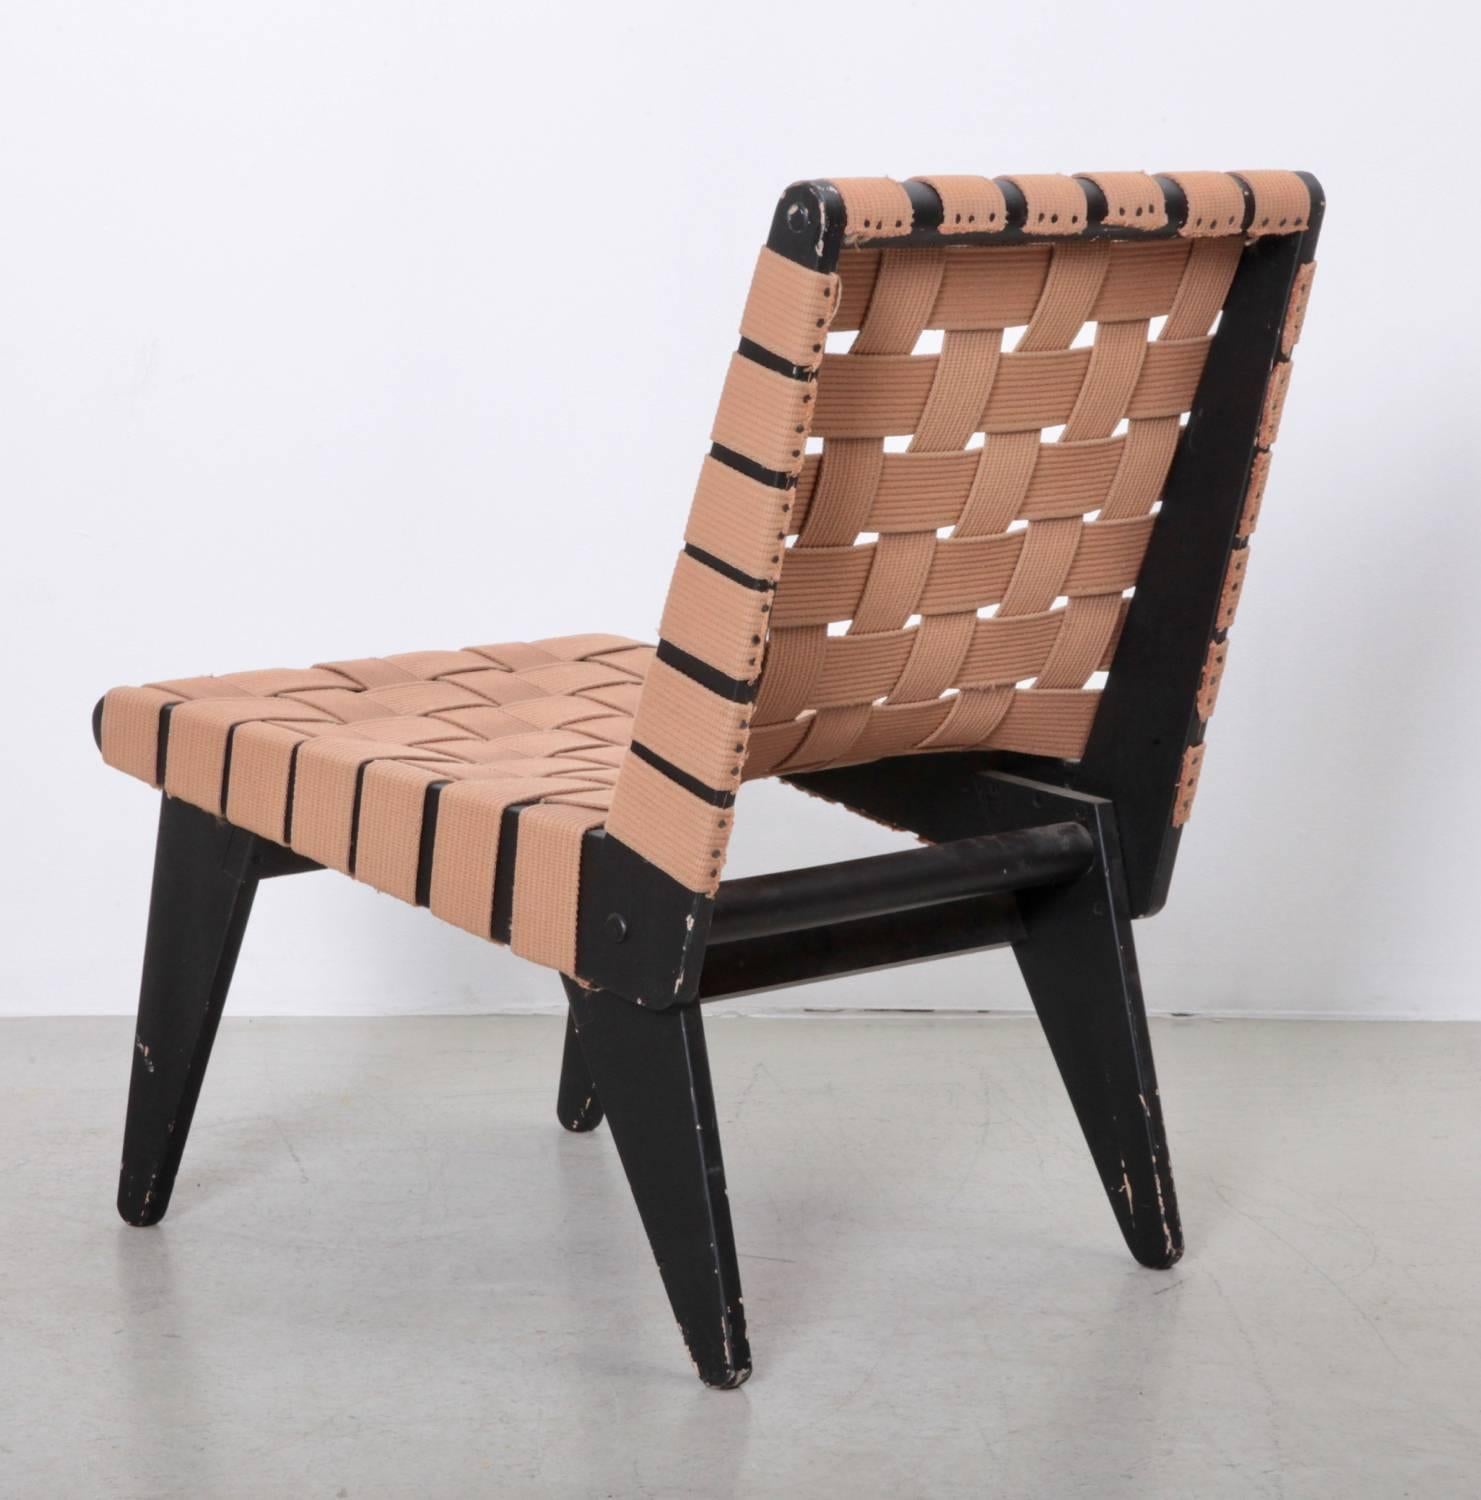 Rare large lounge chair by Klaus Grabe with beige textile straps on a black lacquered plywood frame. Chair has an authentic vintage patina.